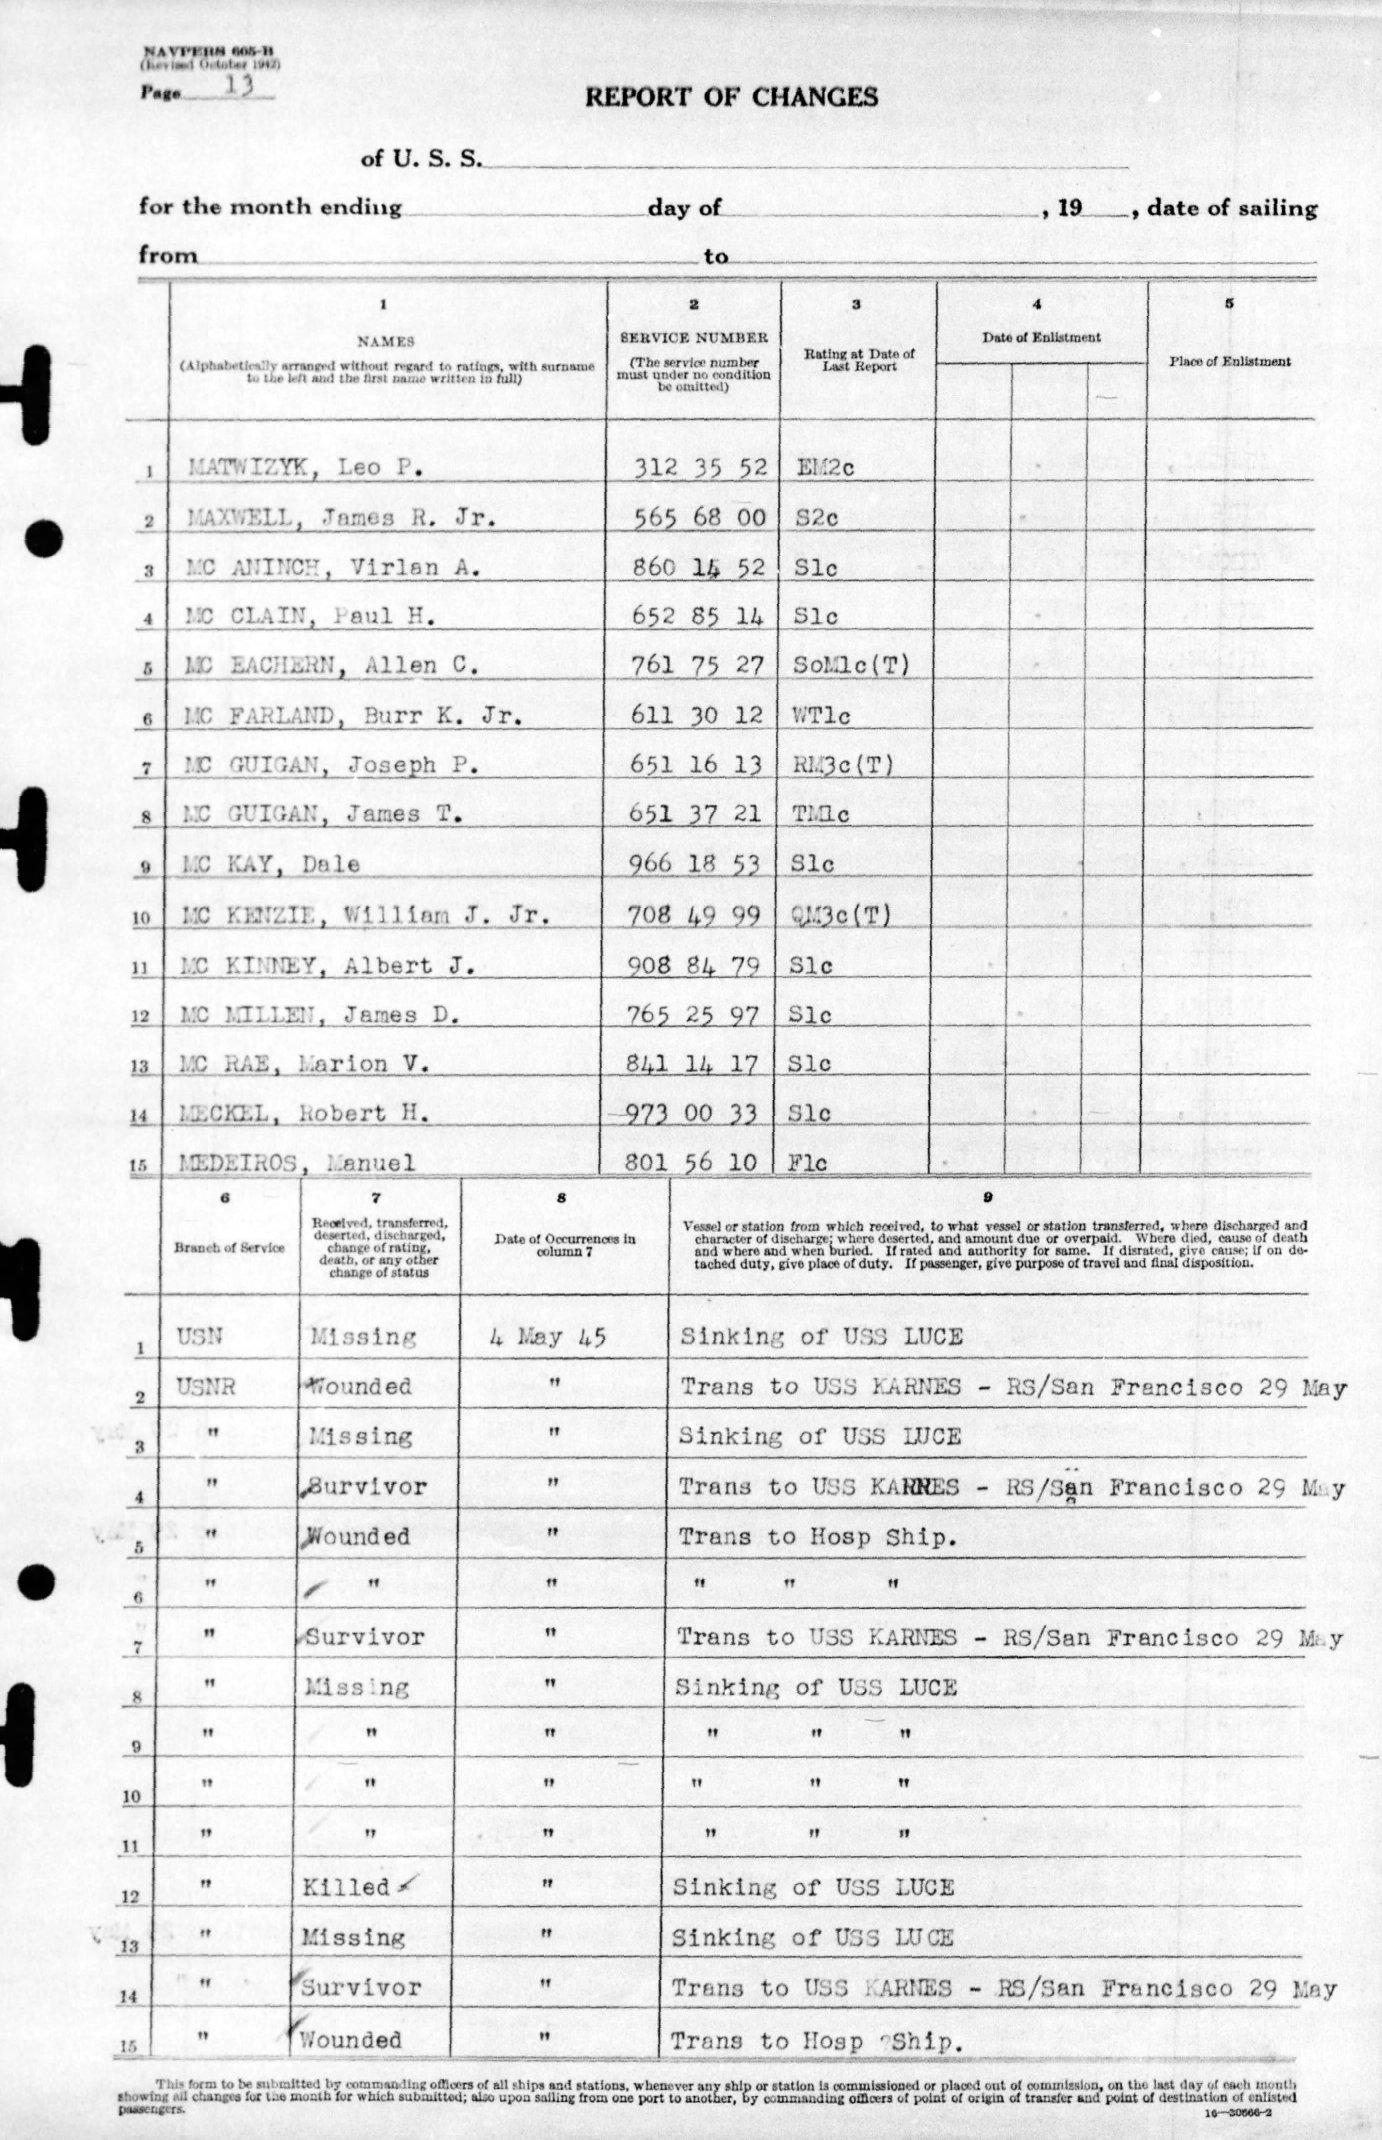 USS Luce final muster list dated June 19, 1945 after the ship was sunk May 4, 1945. Page 15 of 25.